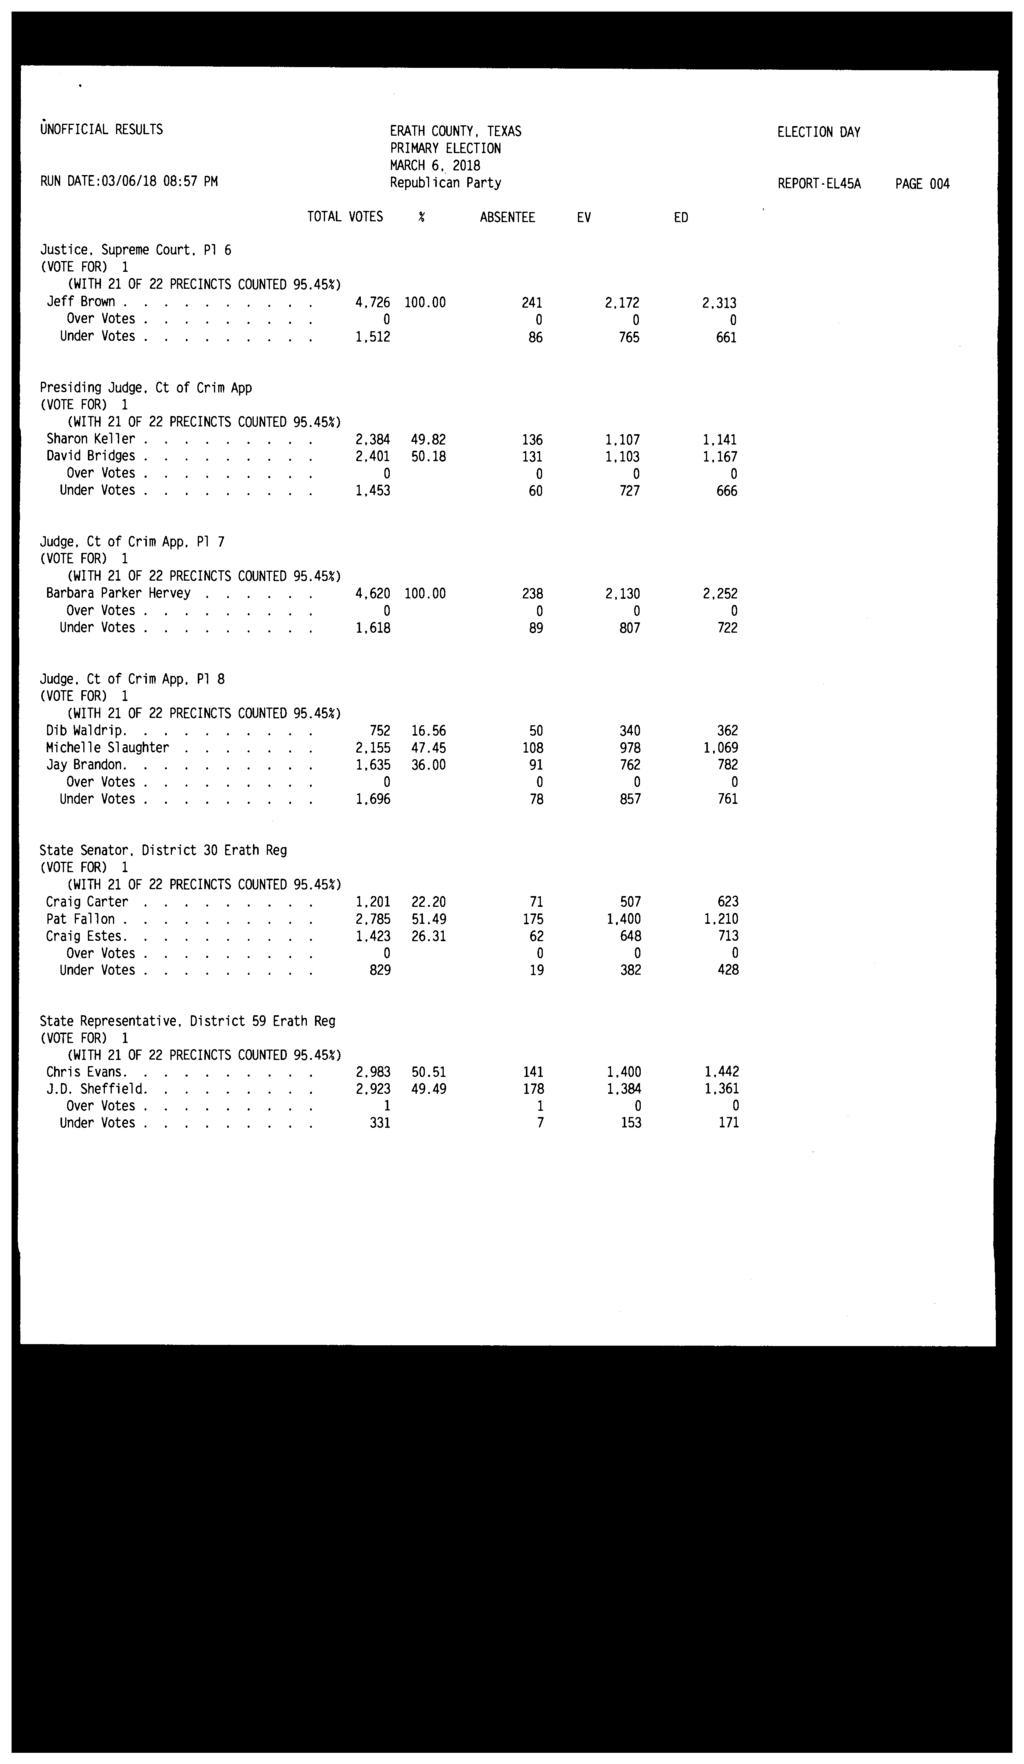 UNOFFICIAL RESULTS ERATH COUNTY, TEXAS ELECTION DAY RUN DATE:03/06/18 08:57 PM Republican Party REPORT EL45A PAGE 004 Justice. Supreme Court. Pl 6 Jeff Brown. 4,726 100.00 241 2.172 2,313 Under Votes.